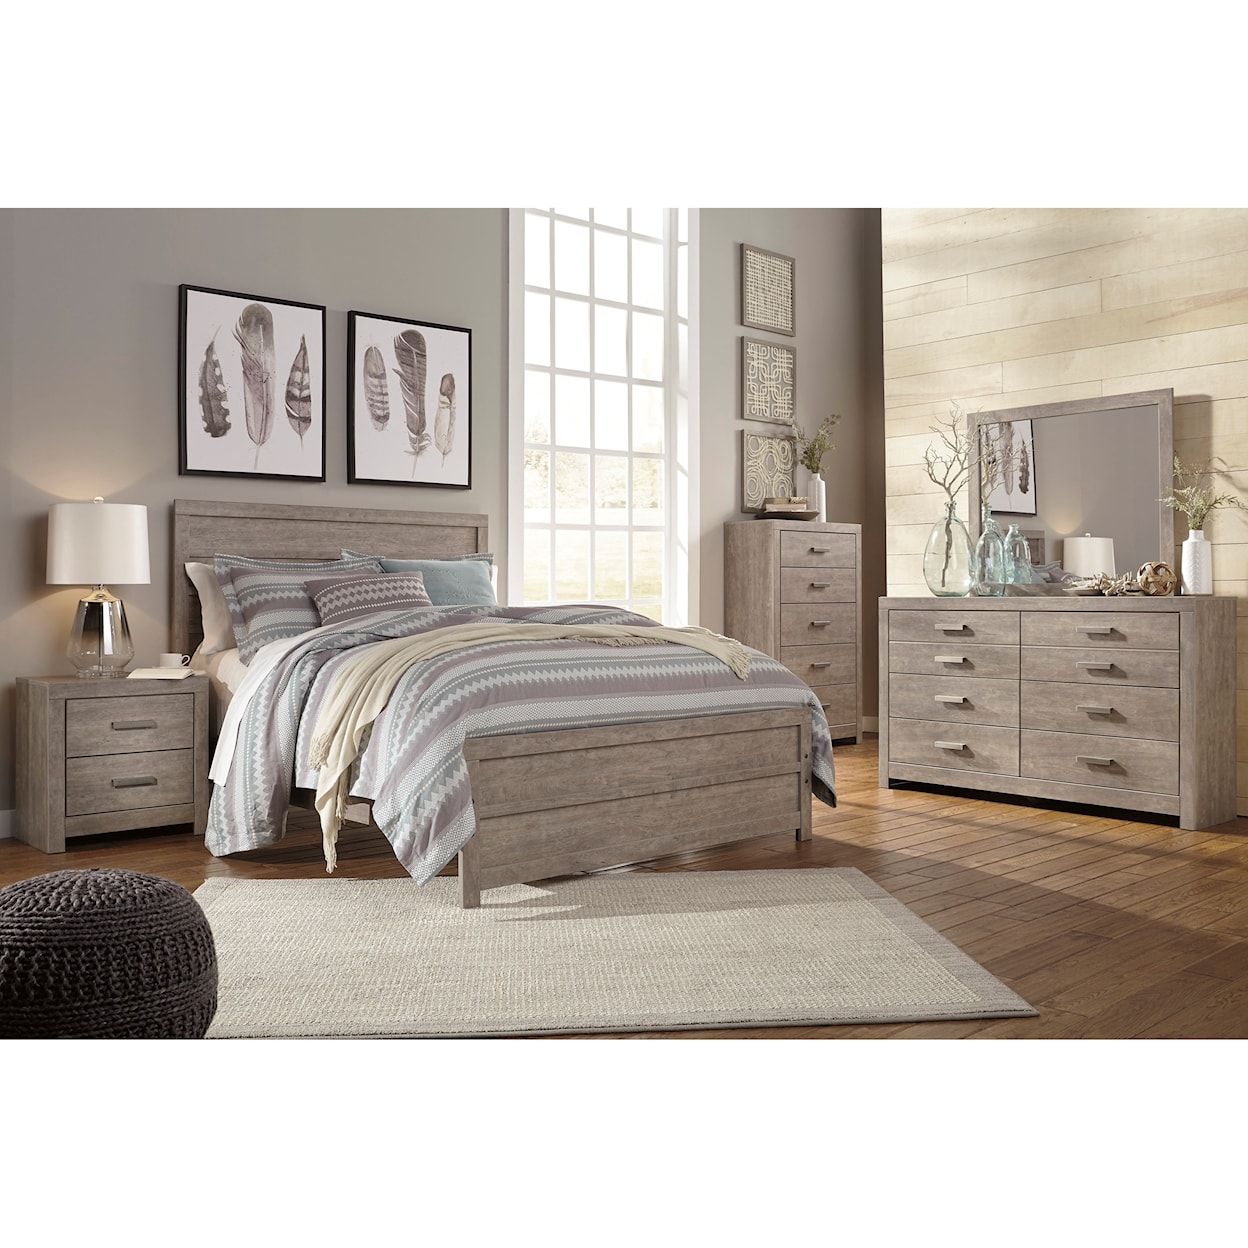 Signature Design by Ashley Furniture Culverbach Queen Bedroom Group